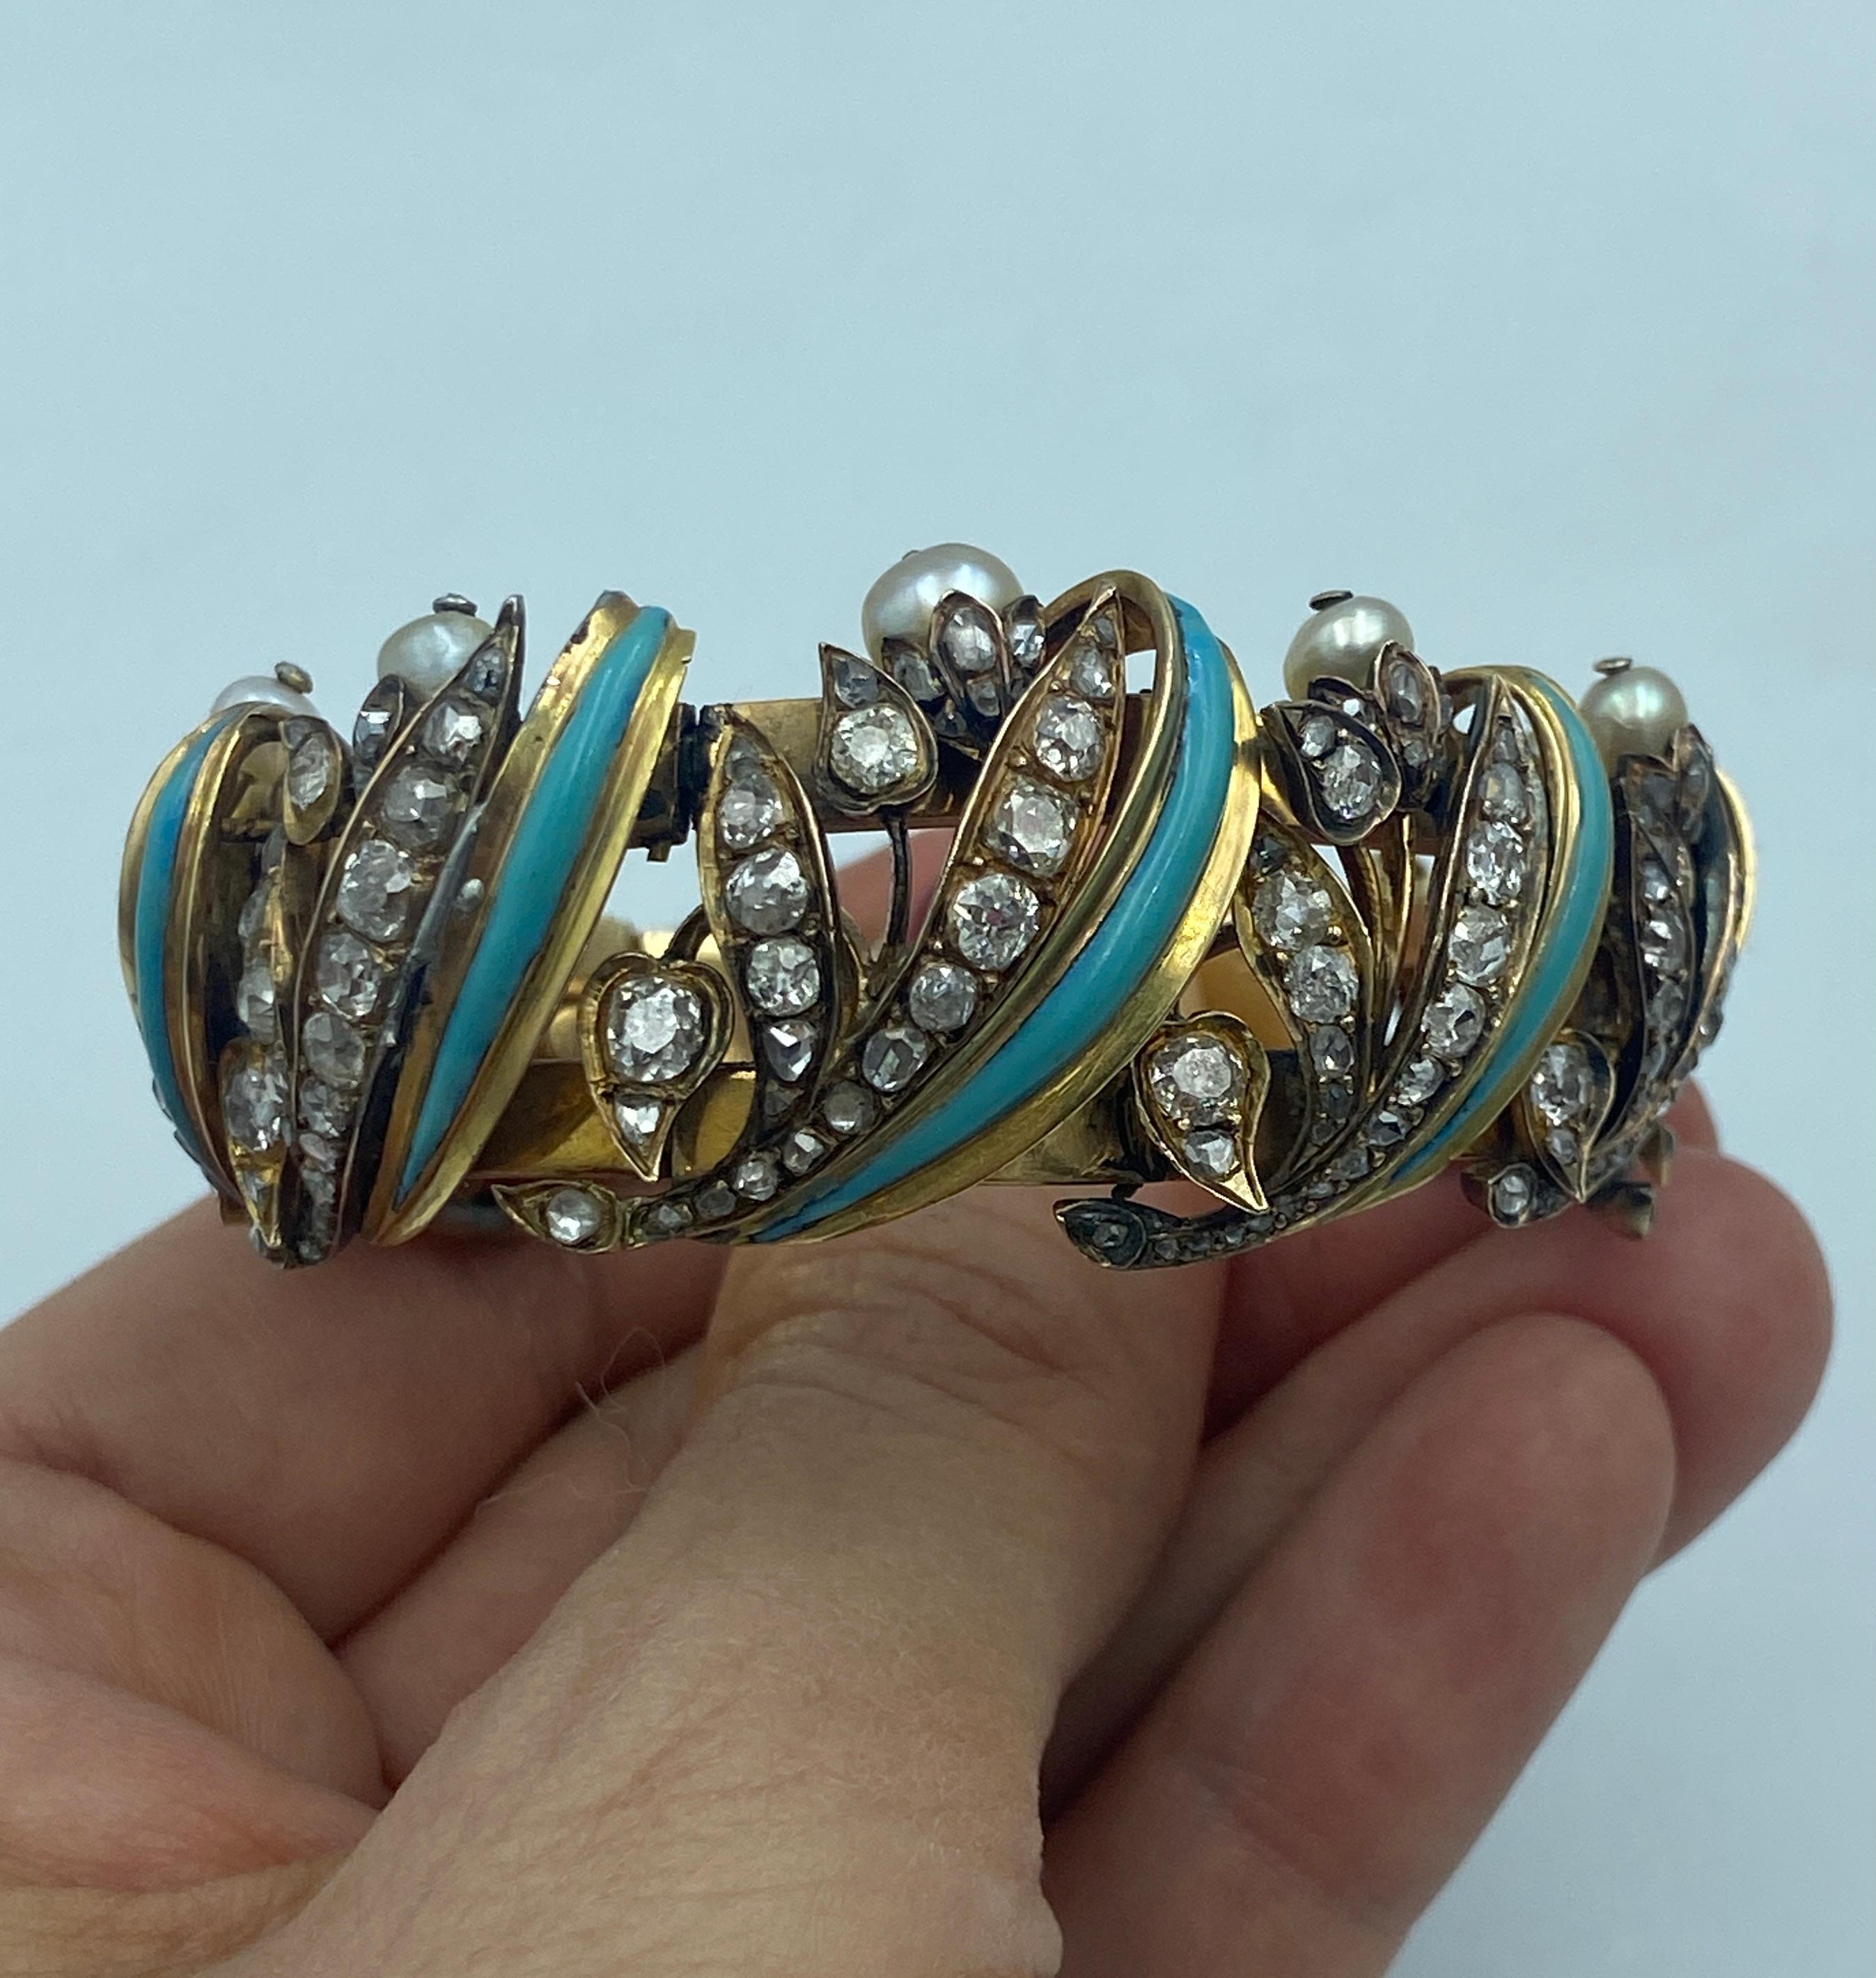 This unique European bracelet dating back to the 1820's is made of 18k gold, turquoise, natural pearls and approximately 4-5 carats of old mine cut diamonds. It is a remarkably beautiful piece and is a true collector's piece. The bracelet is